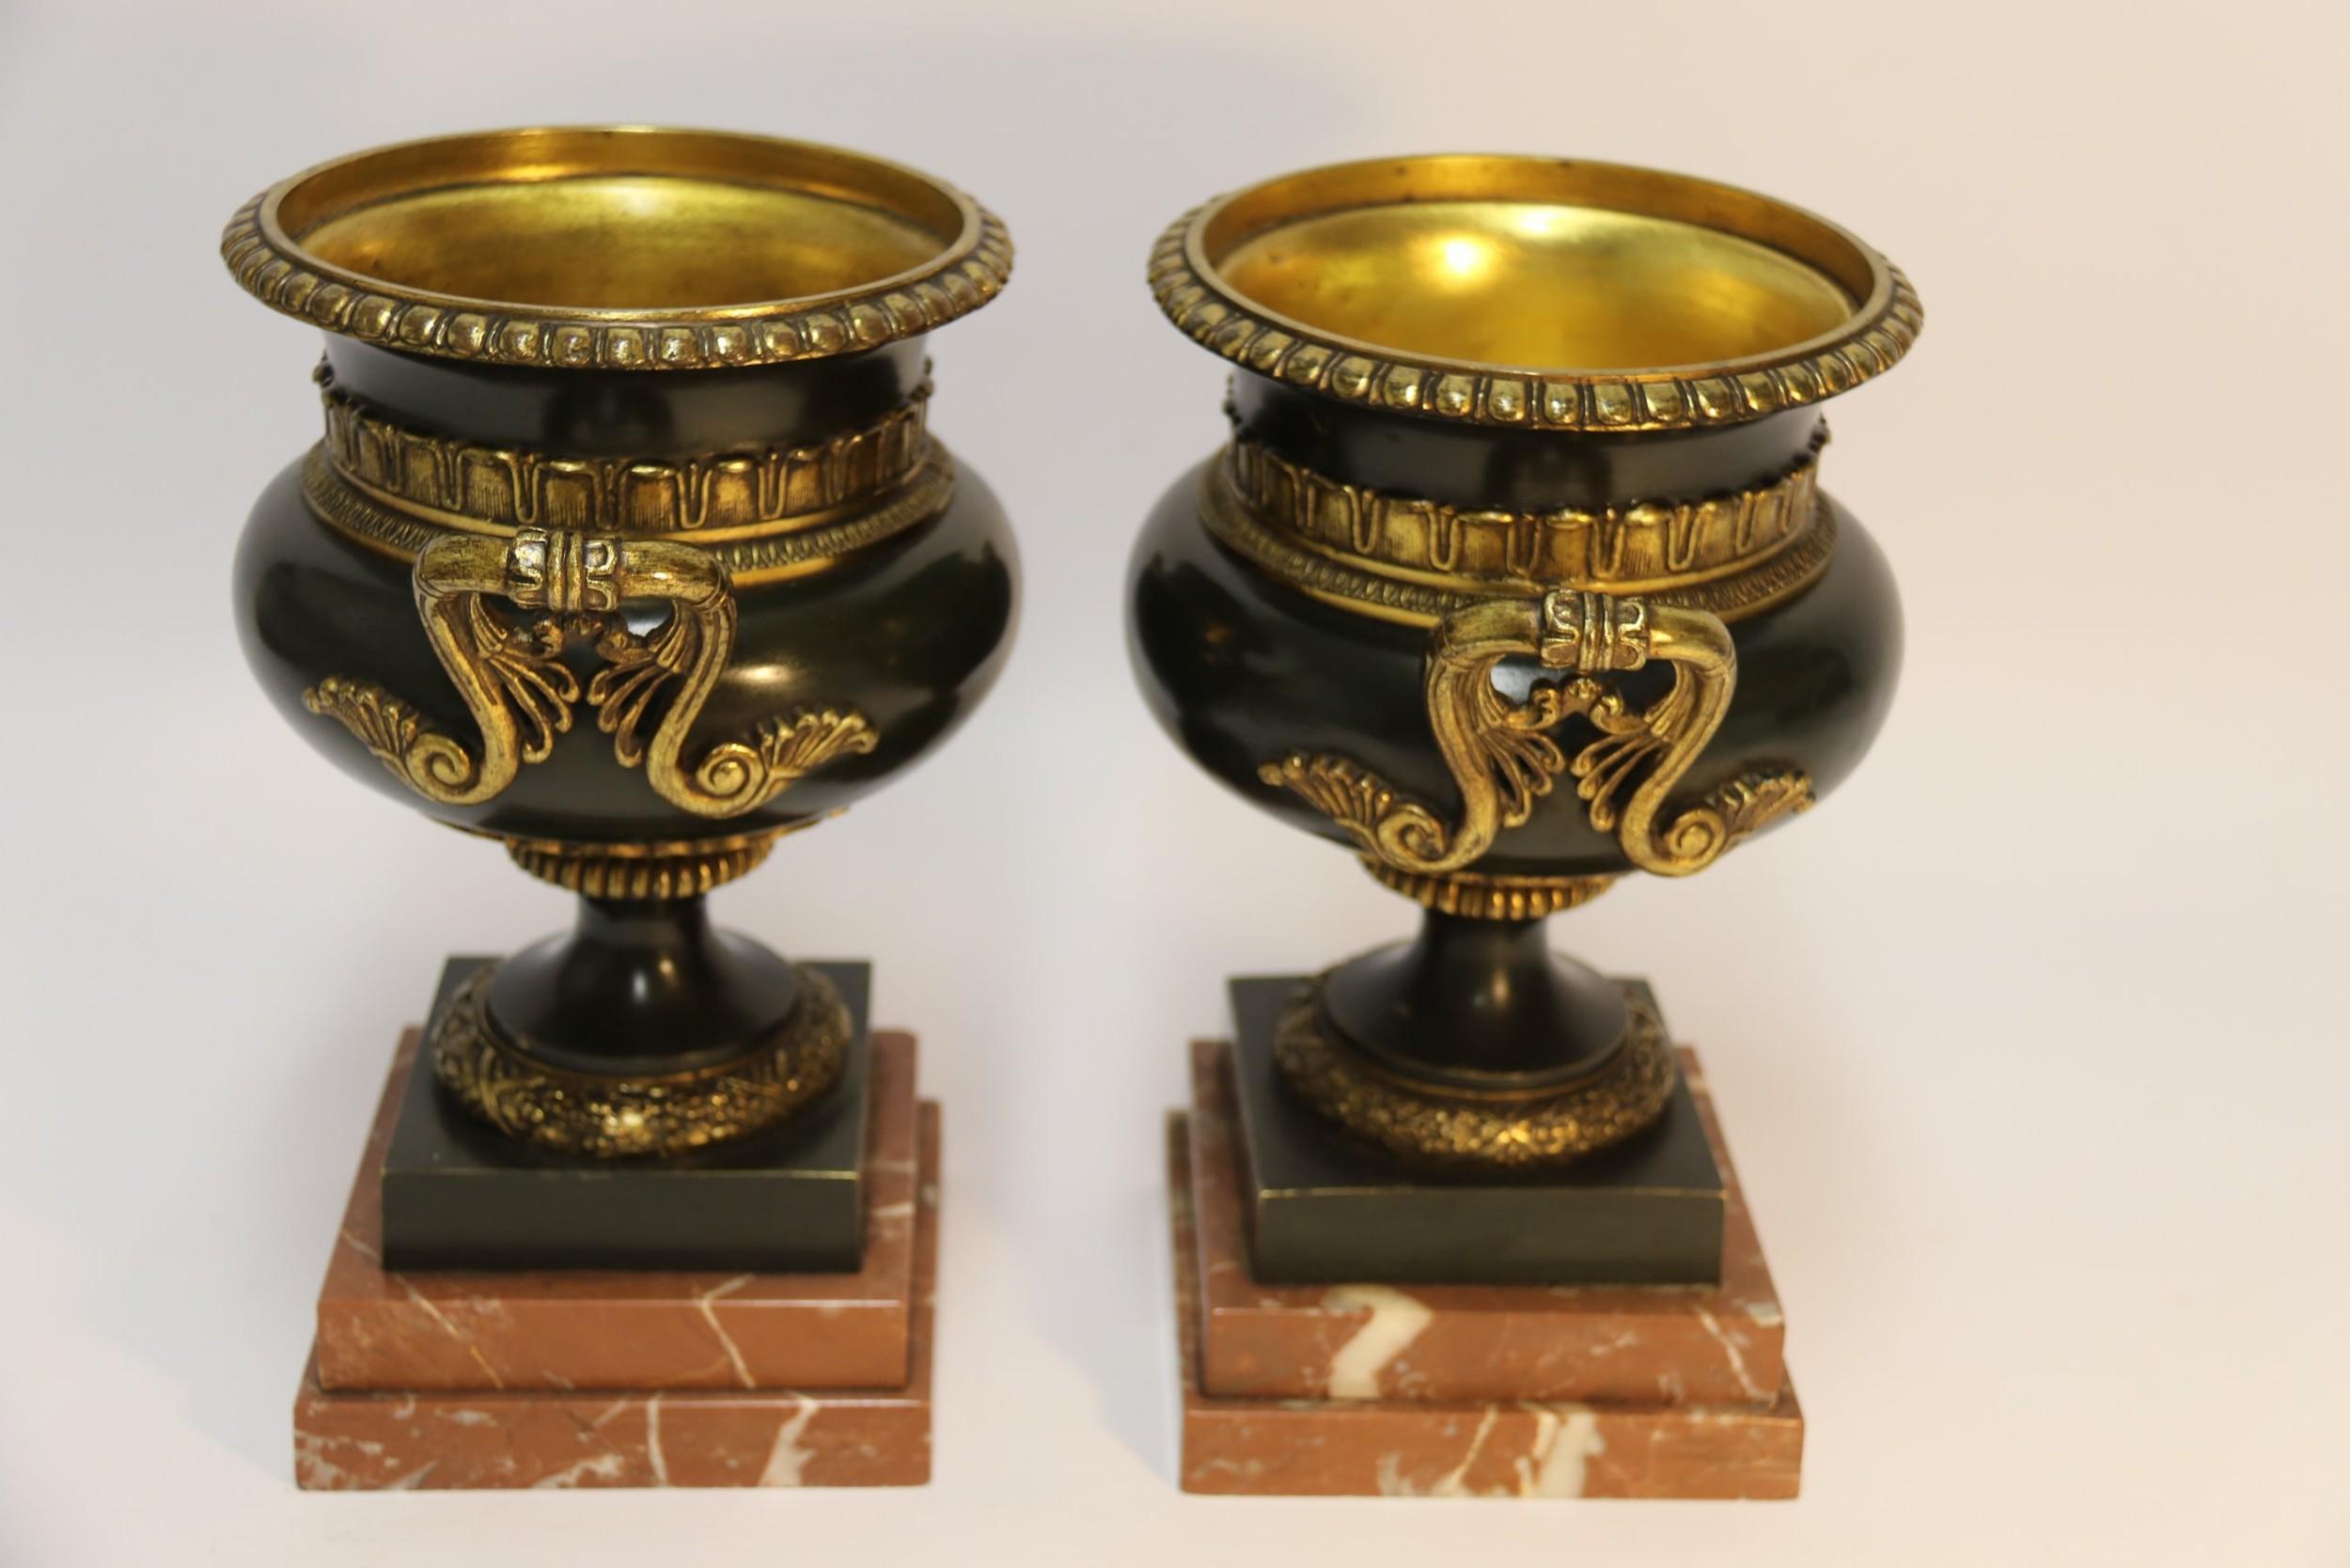 This stylish pair of decorative French 19th century bronze urns have a dark green patinated body with gilt bronze decorative collars and side handles which contrast and complement each other. They are mounted on double stepped rouge with white veins